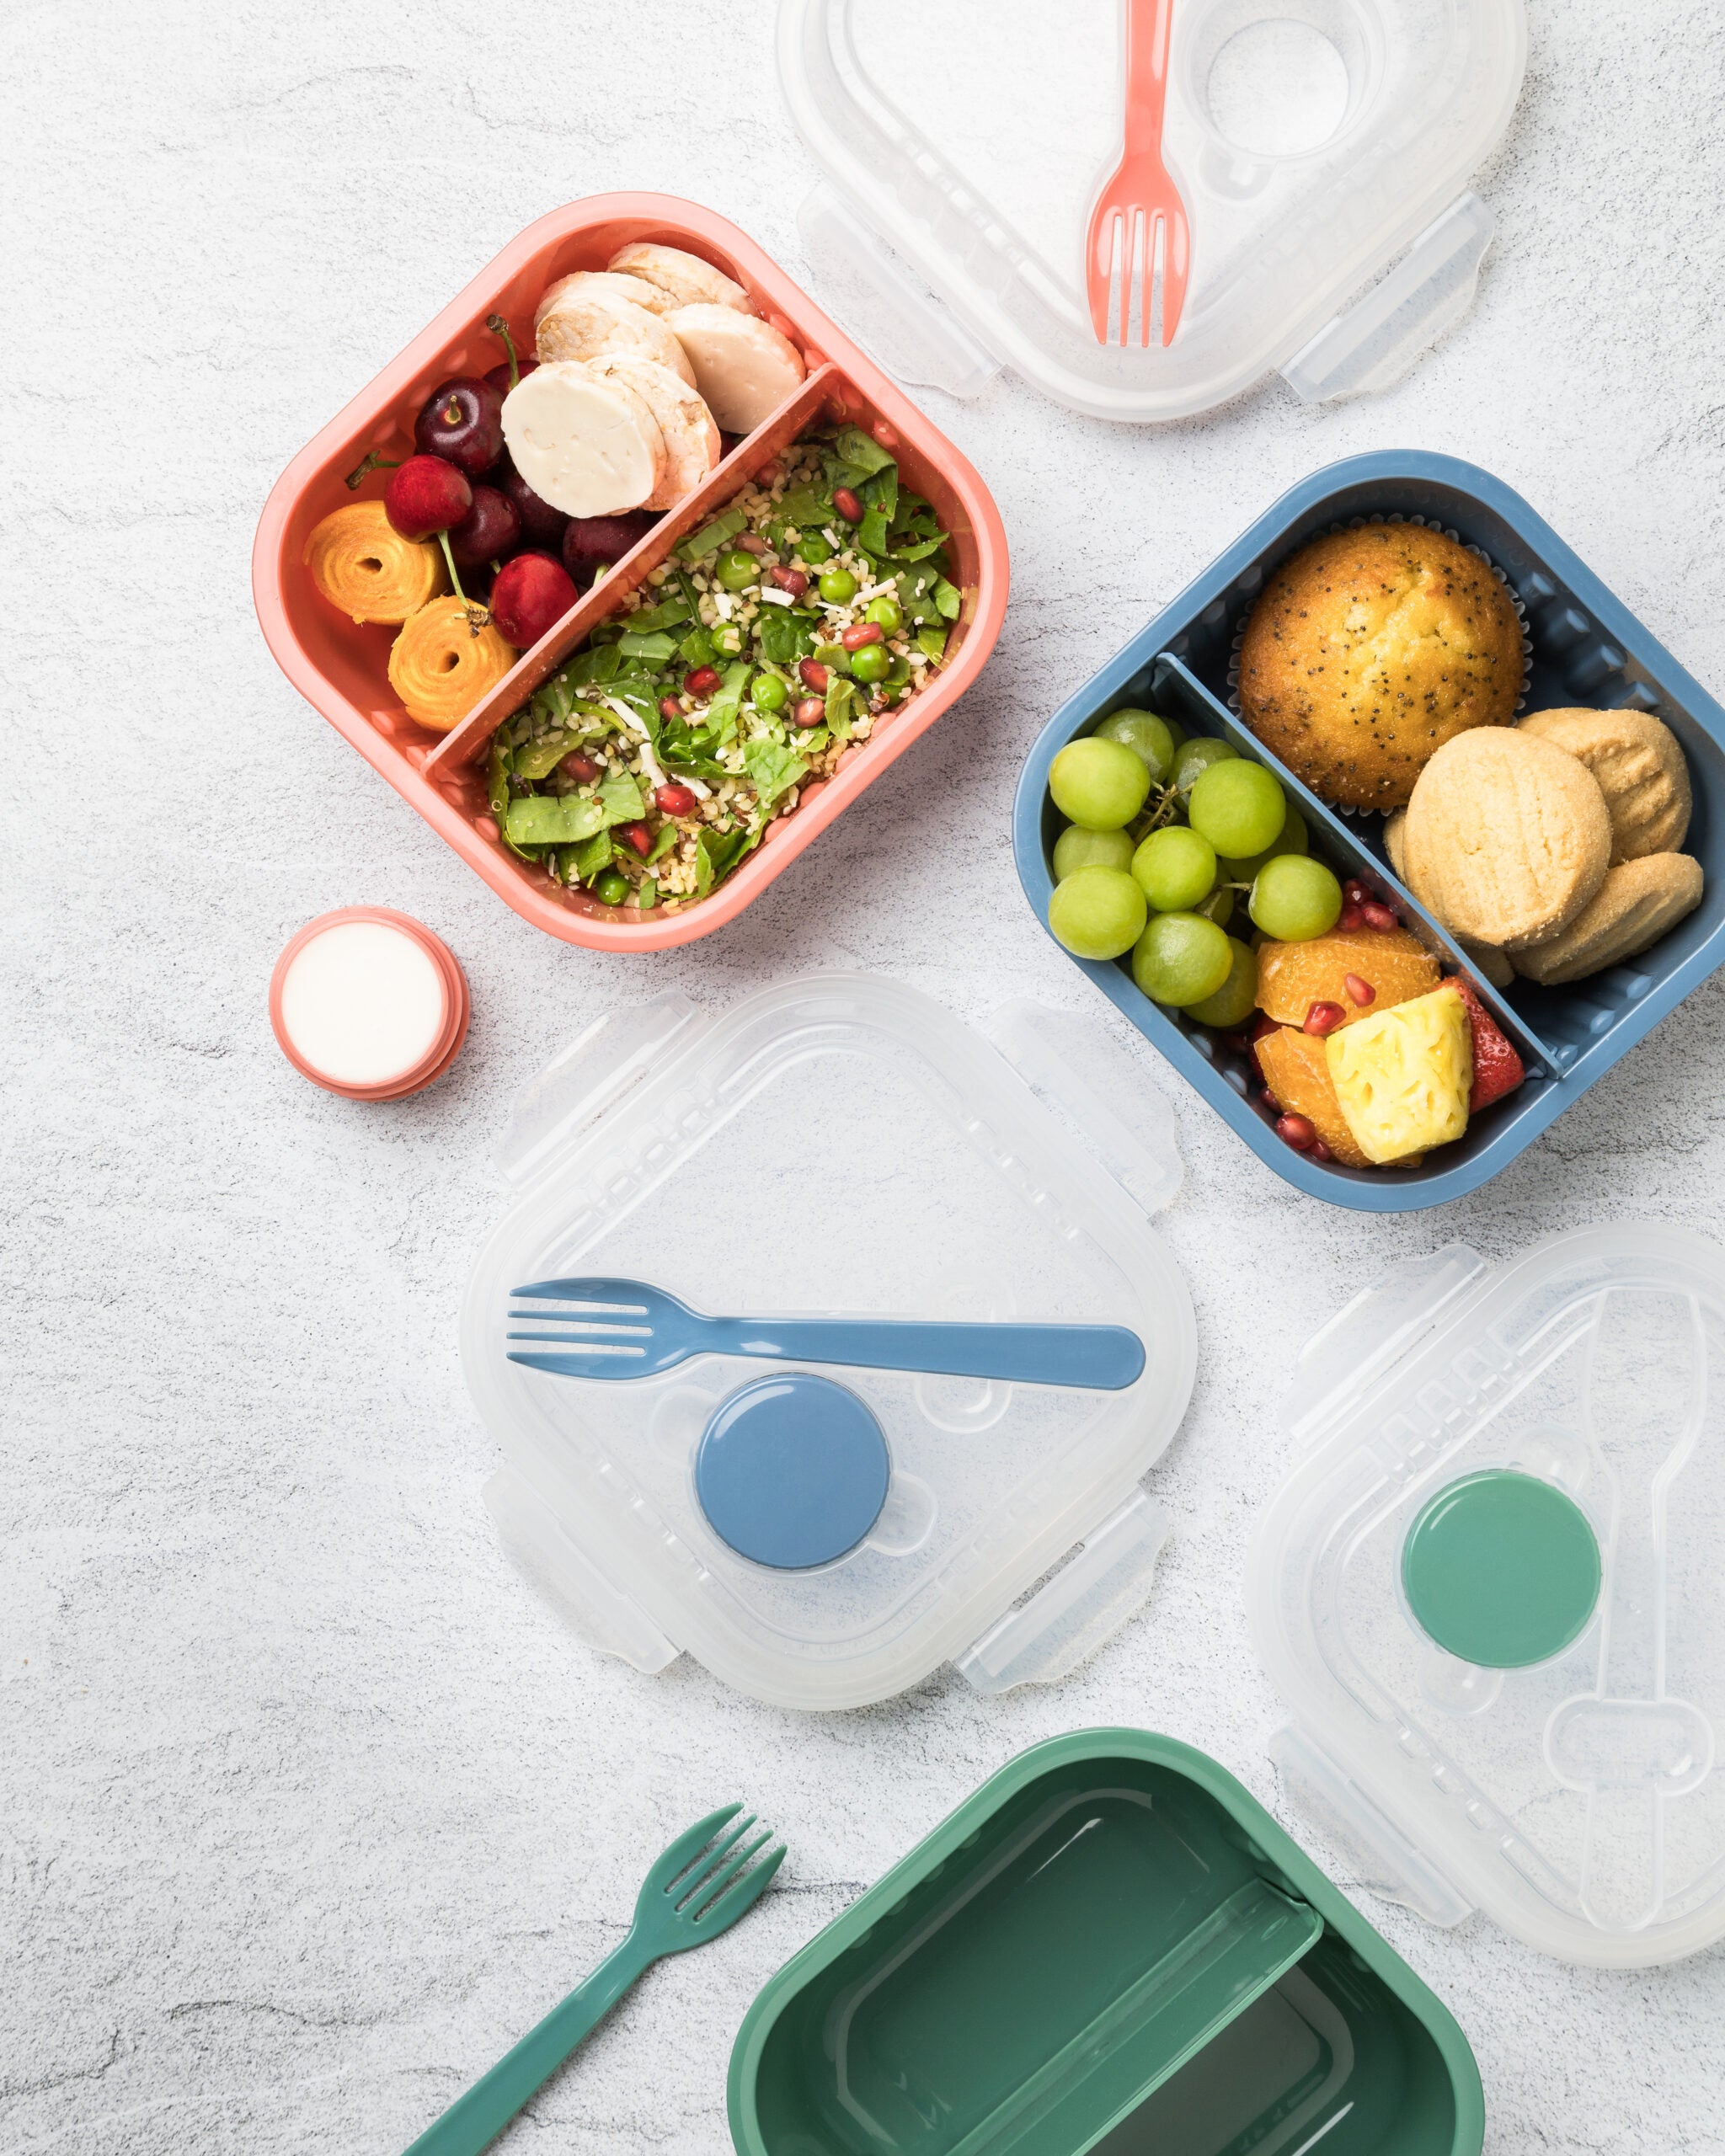 830ml Snappy Lunch Box Square Blue SN-830B